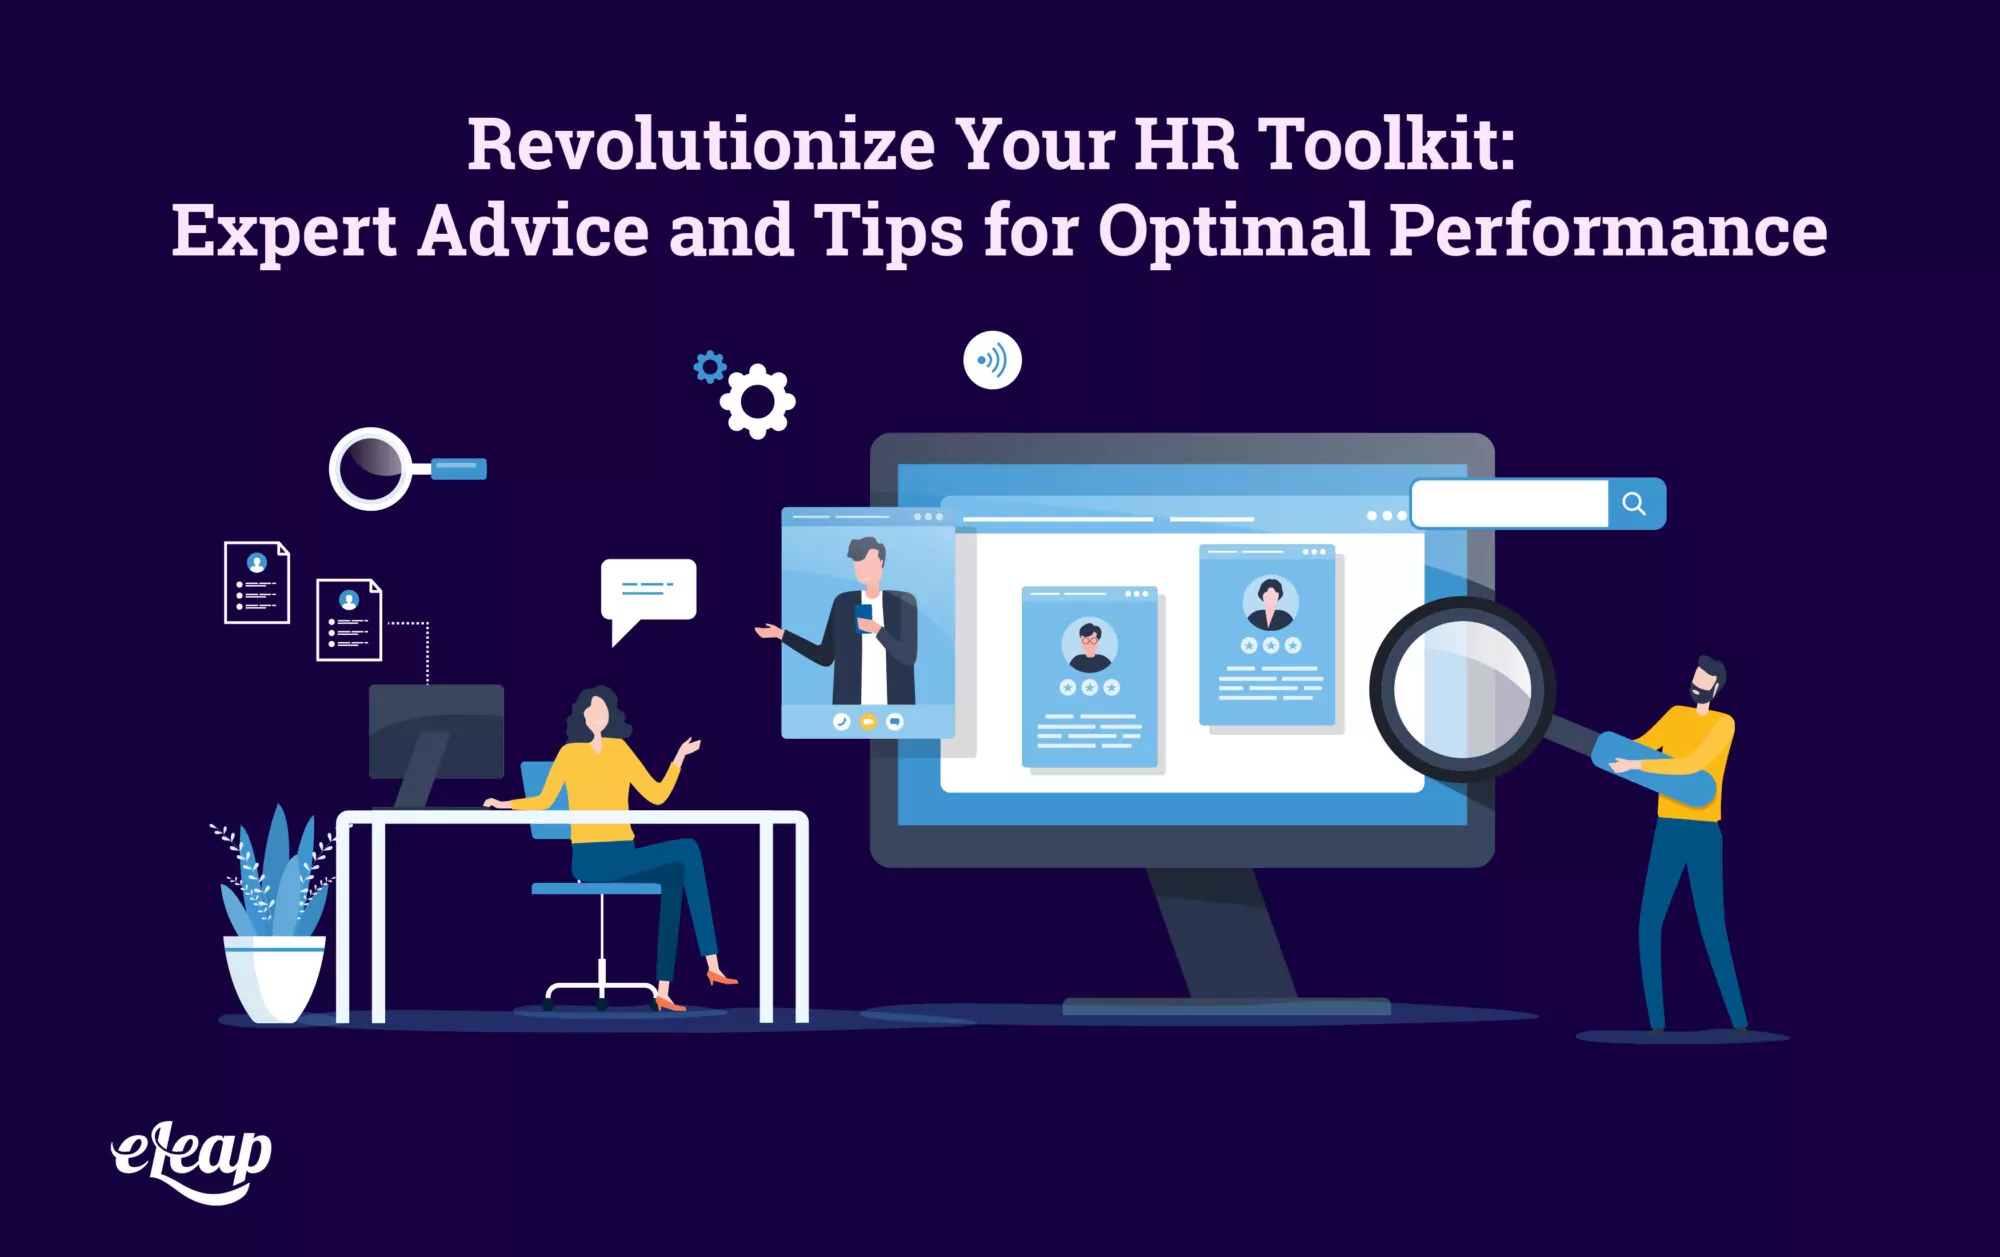 Revolutionize Your HR Toolkit: Expert Advice and Tips for Optimal Performance